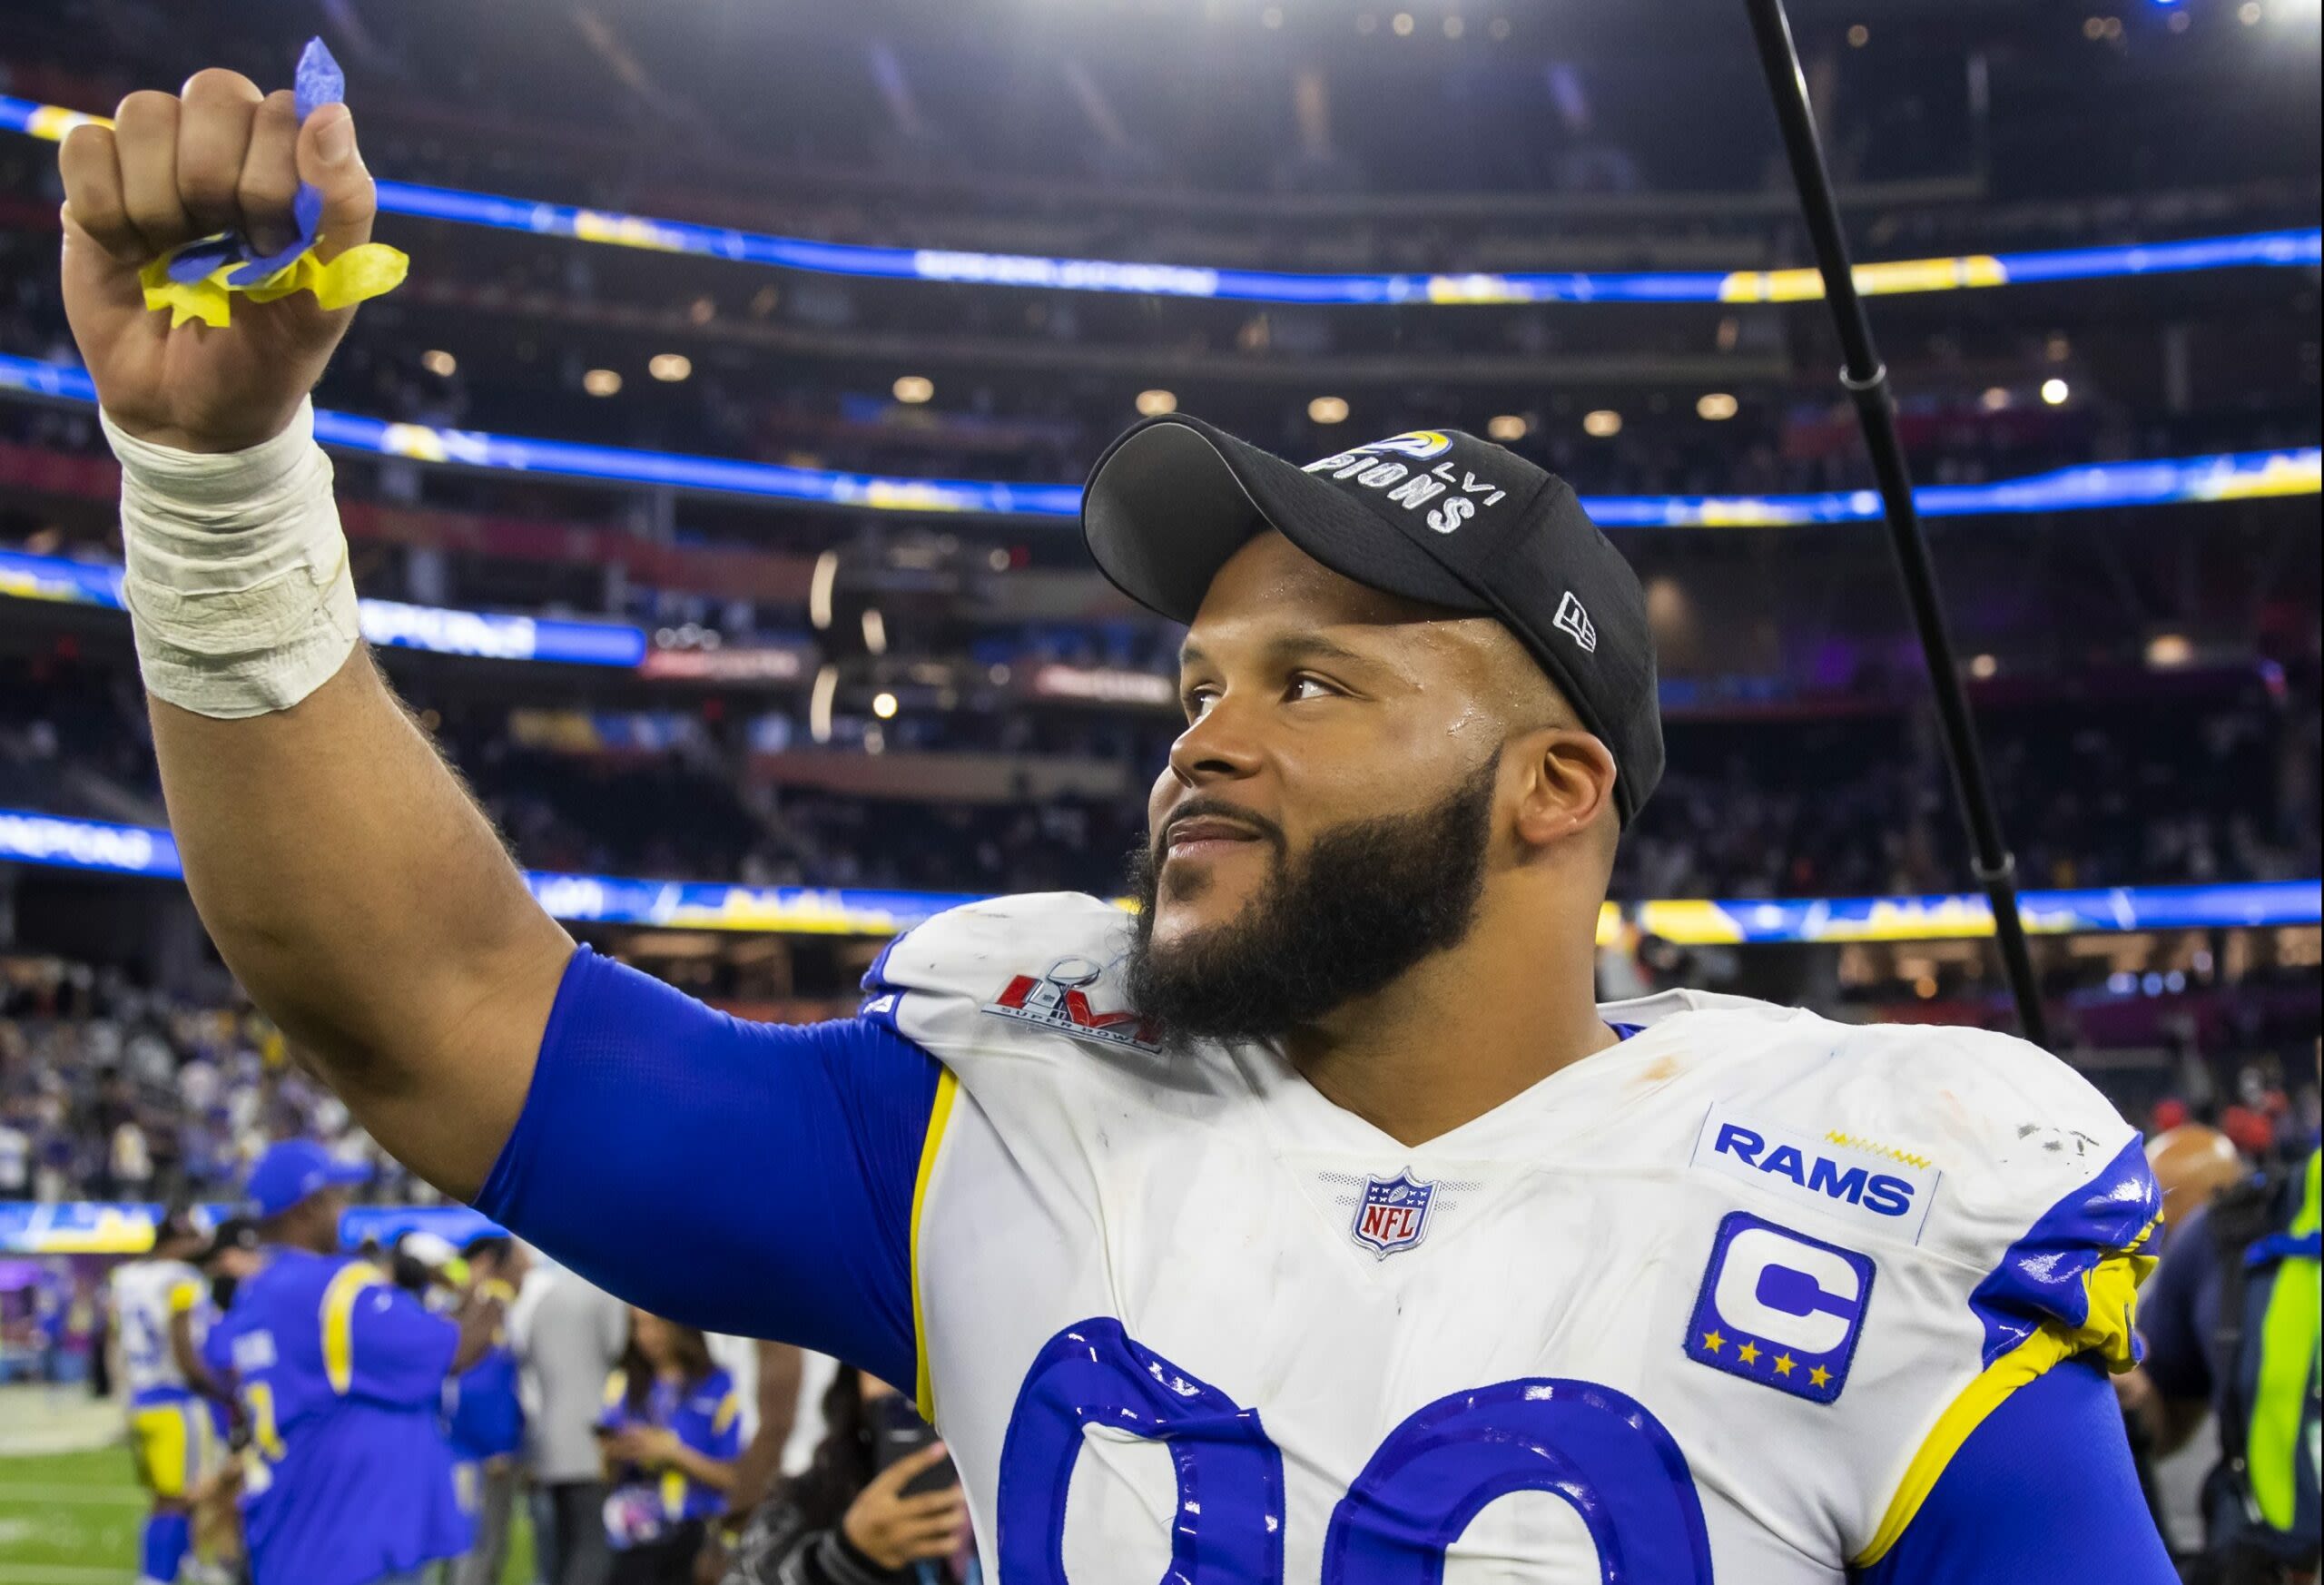 The Rams have taken a Moneyball approach to replacing Aaron Donald